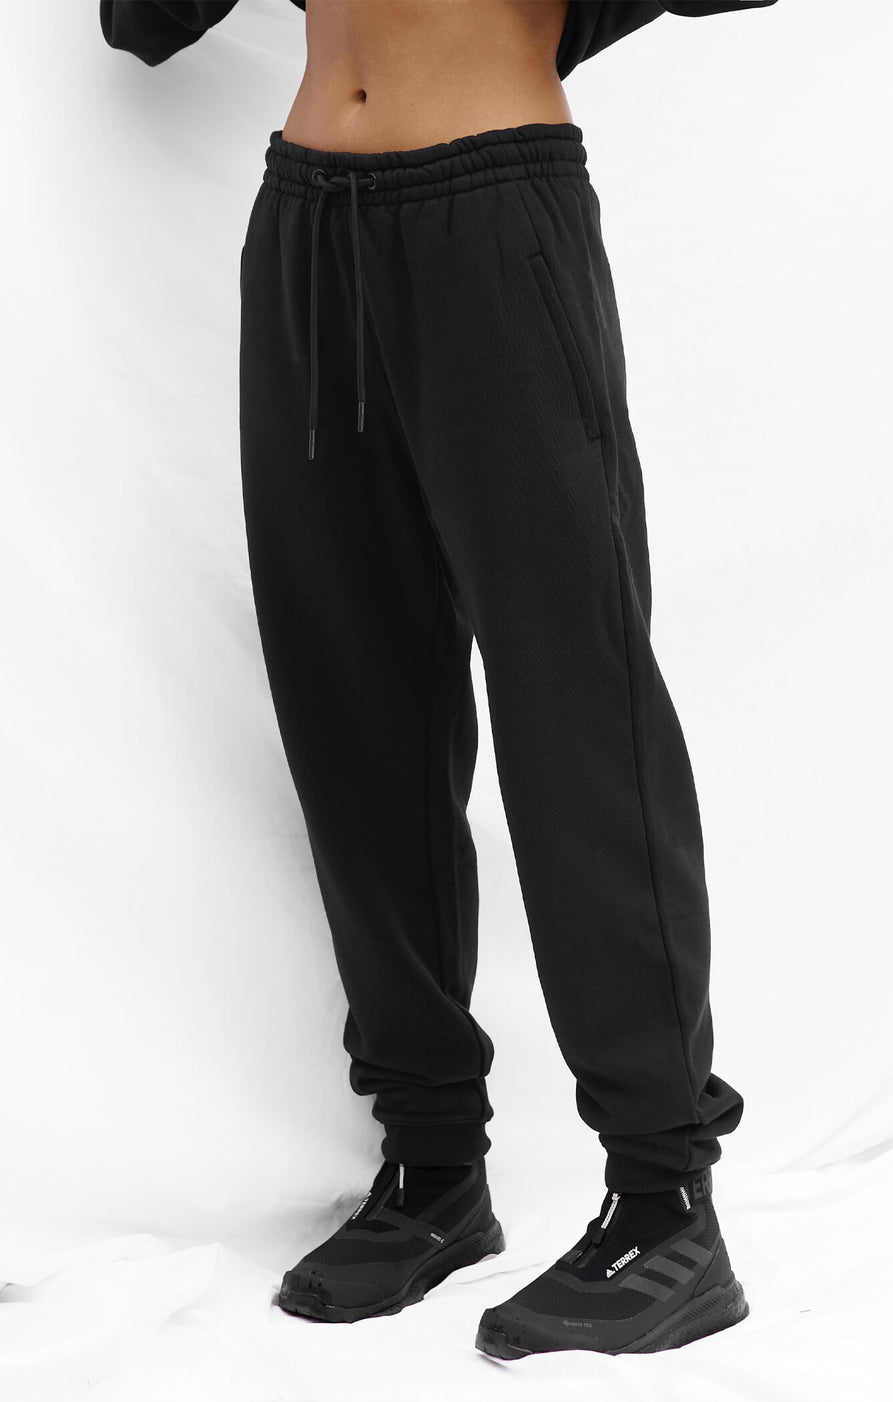 ATTN everyone: retro track pants are going to be a big deal this summer